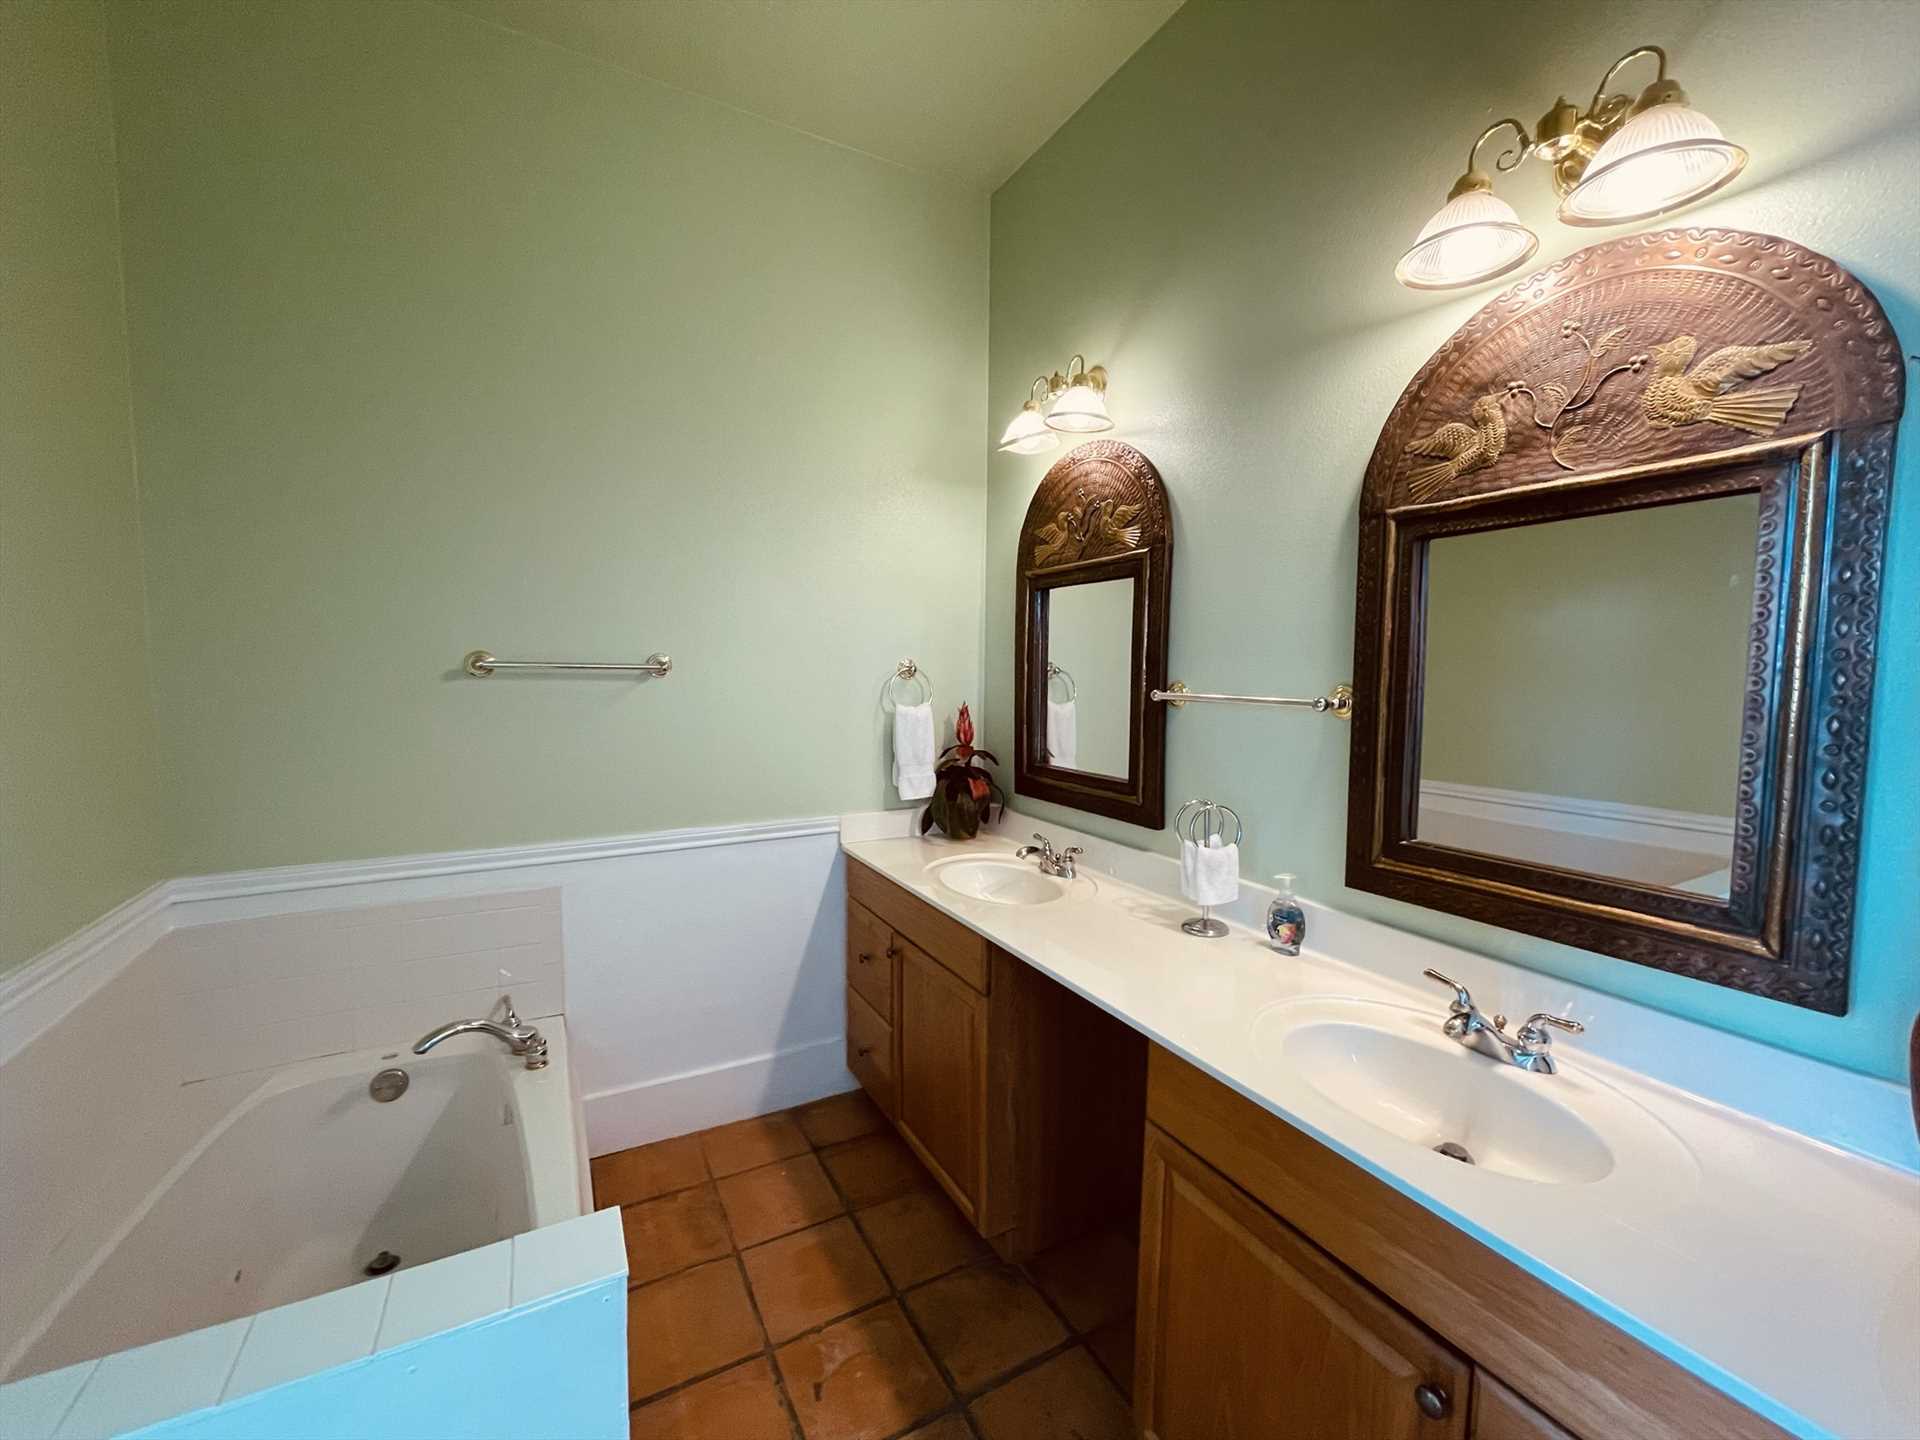                                                 Two of the three full baths at the Lodge have twin vanities installed, for freshening up with no wait!